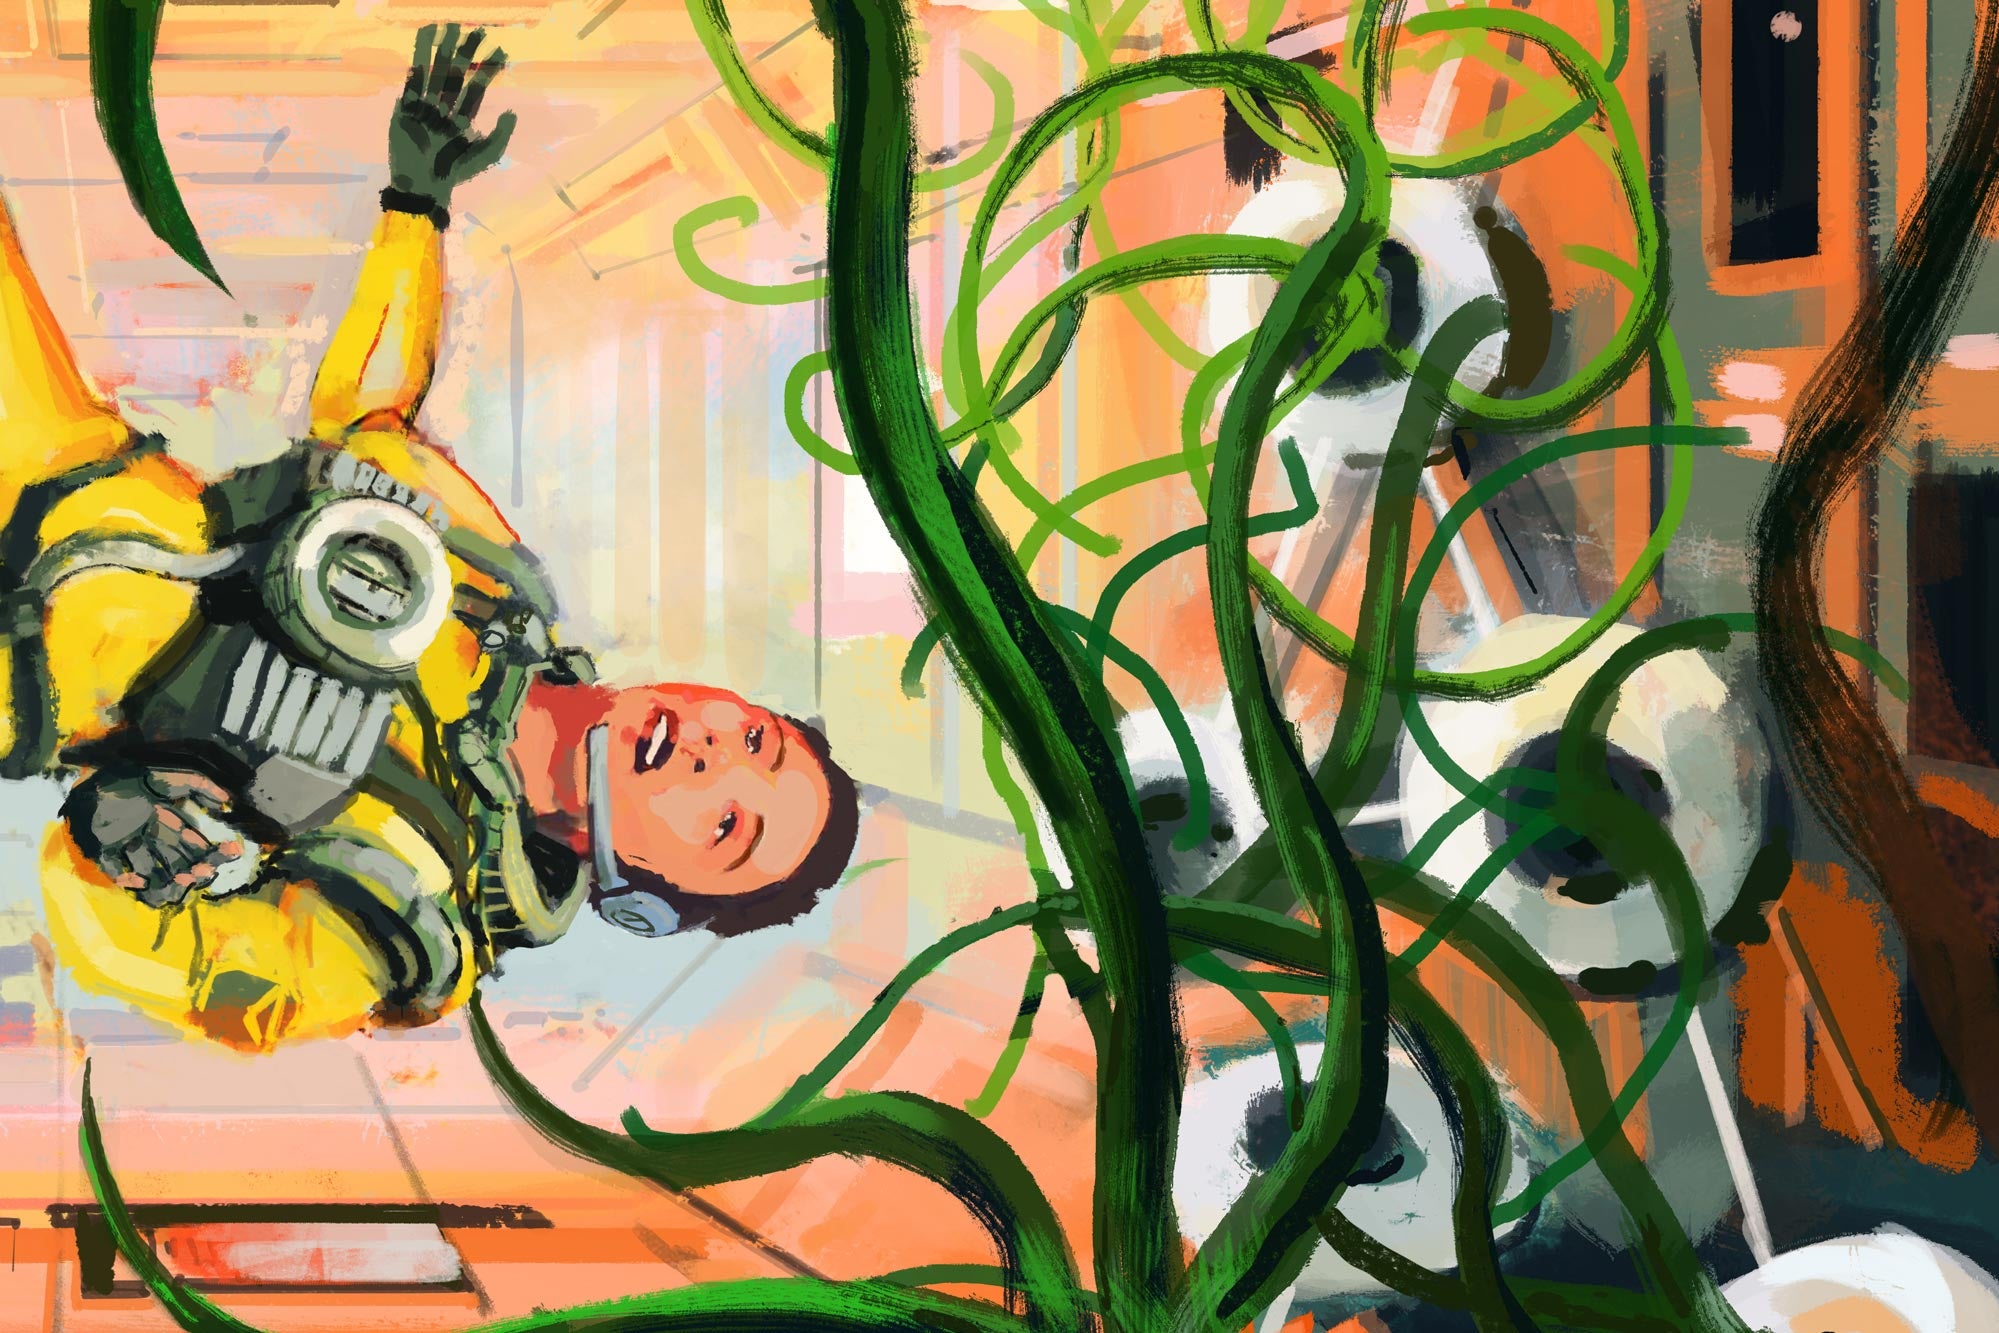 Illustration of an astronaut partially adrift in a room filled with tentacle-like leek plants.